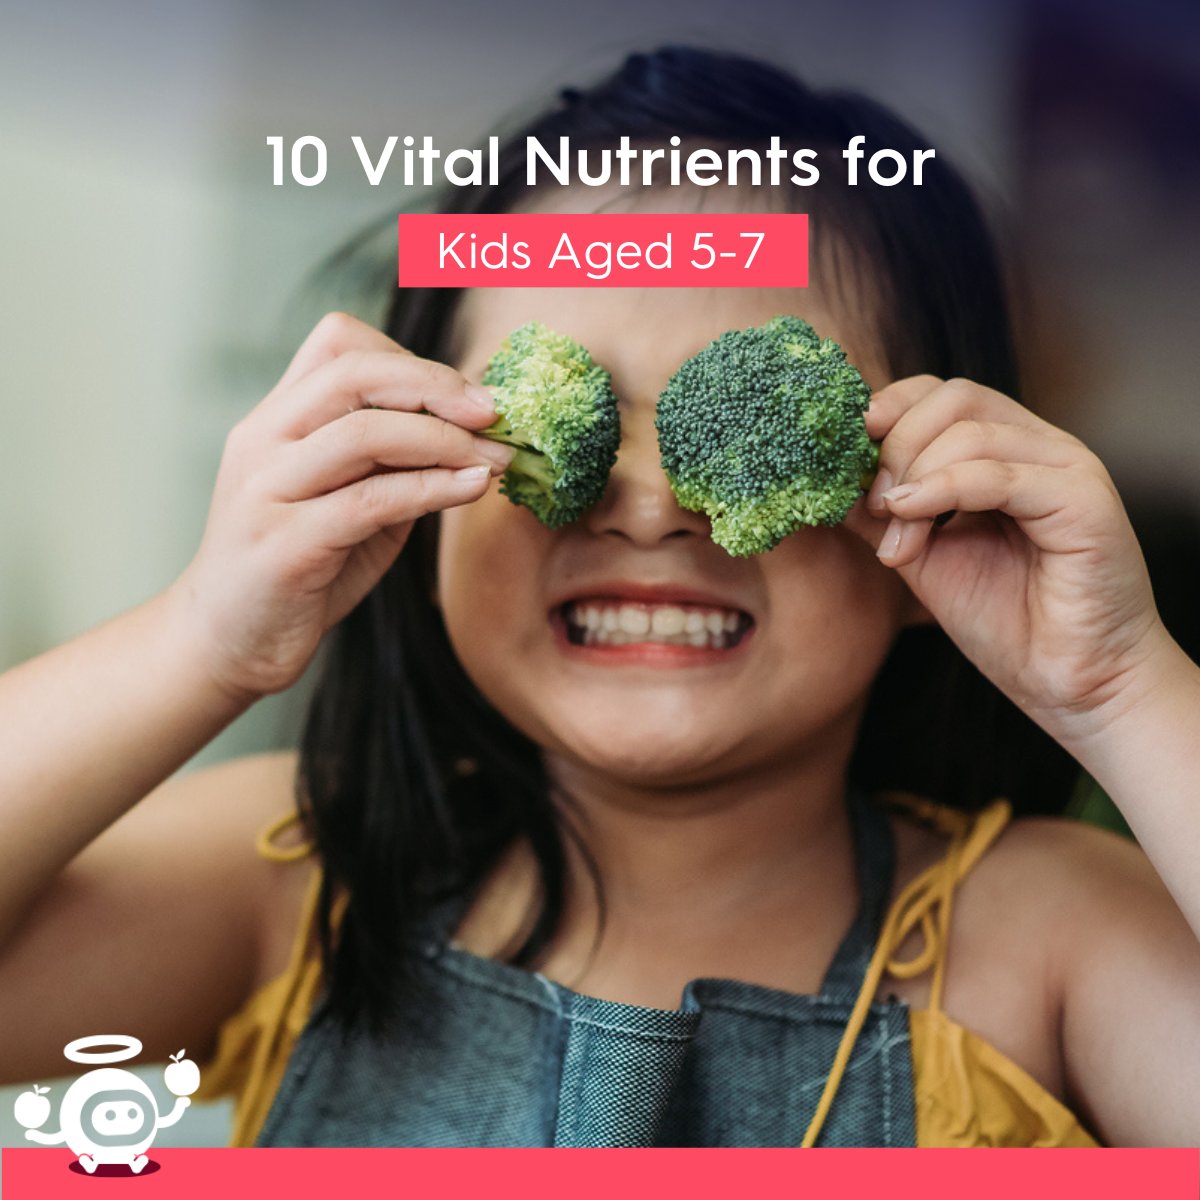 Your kids diet should change during winter time. Start by adding these 10 vital nutrients 🥦🥕🍅🥑 to their diets: bit.ly/3Gl4dtO #kidsdiet #cleandiet #nutritious #winterdiet #dietplan